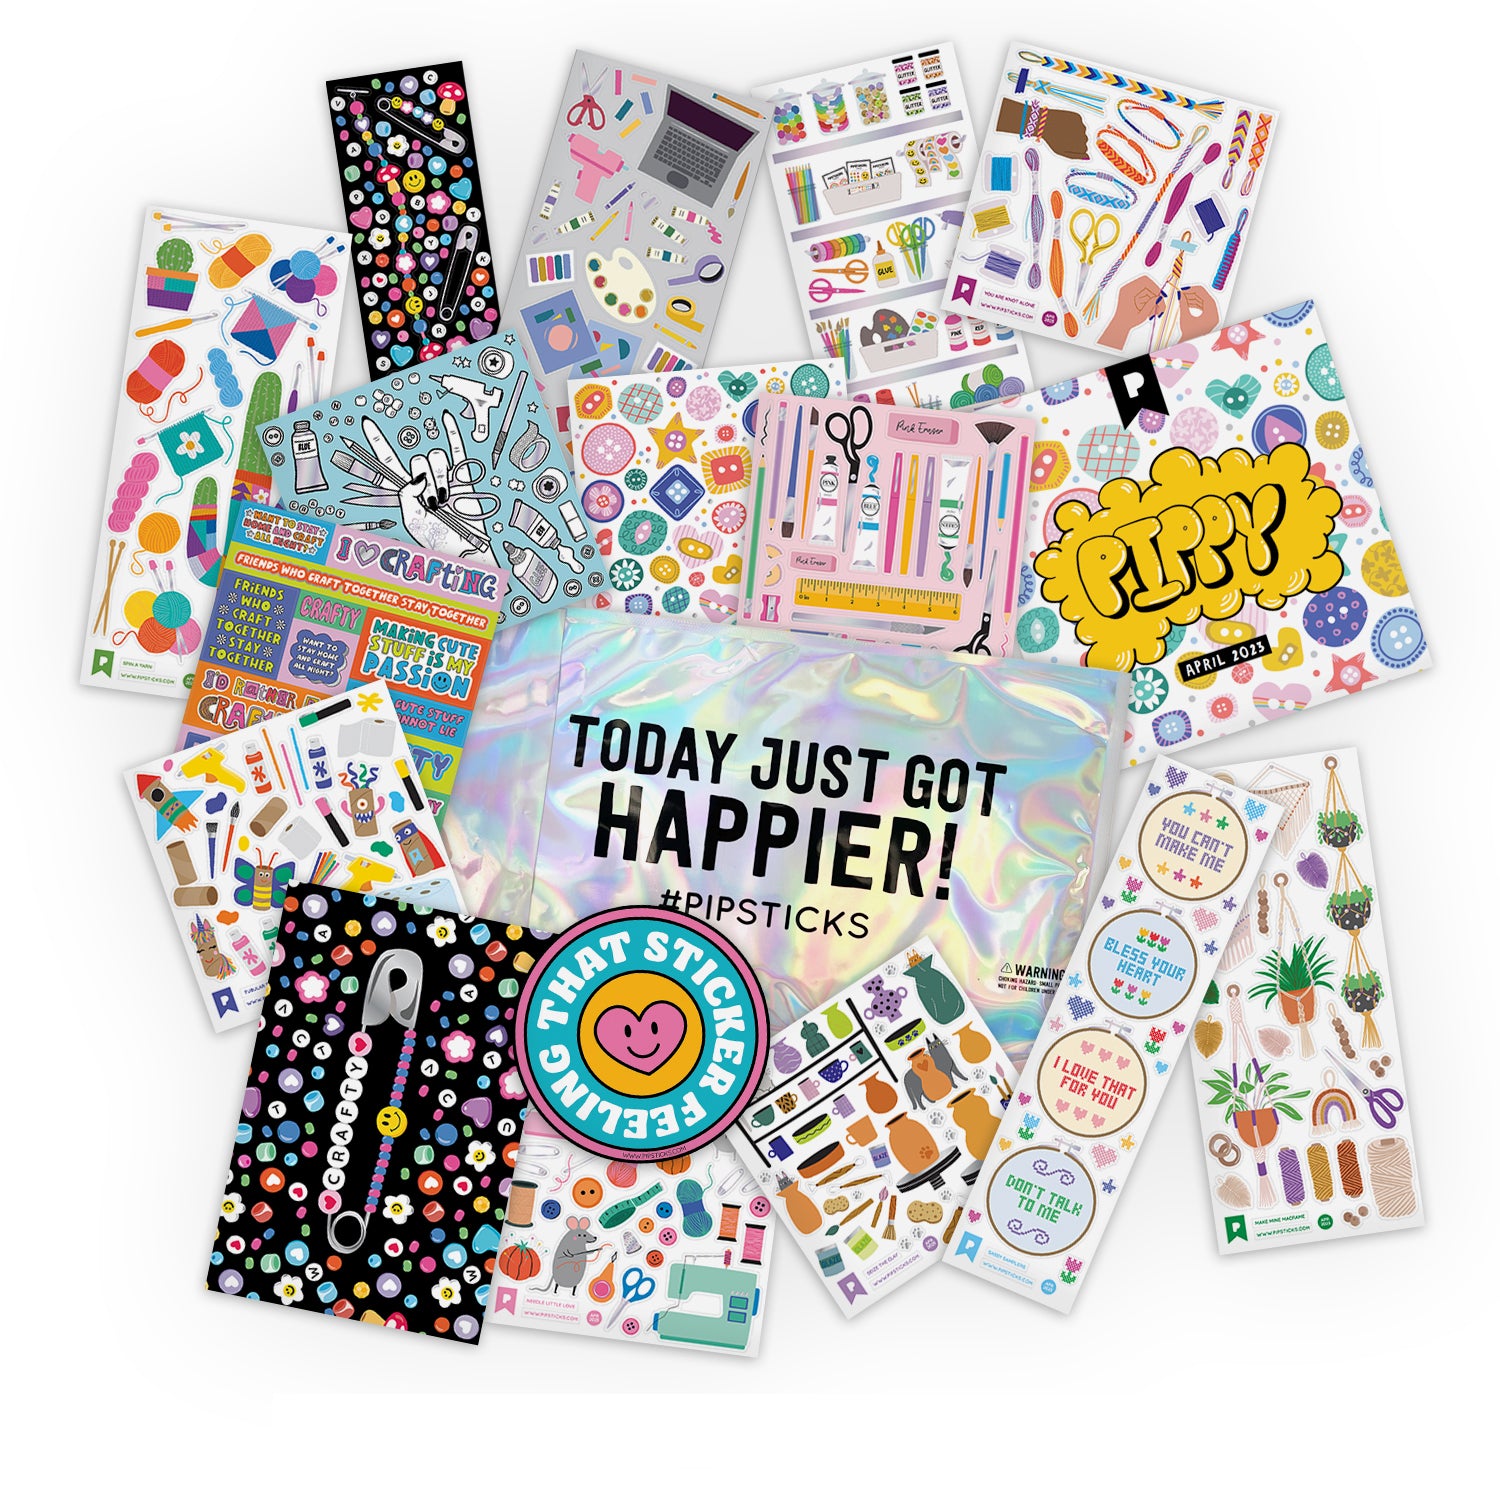 Pipsticks Coupon – Save 50% on a Sticker Club Subscription